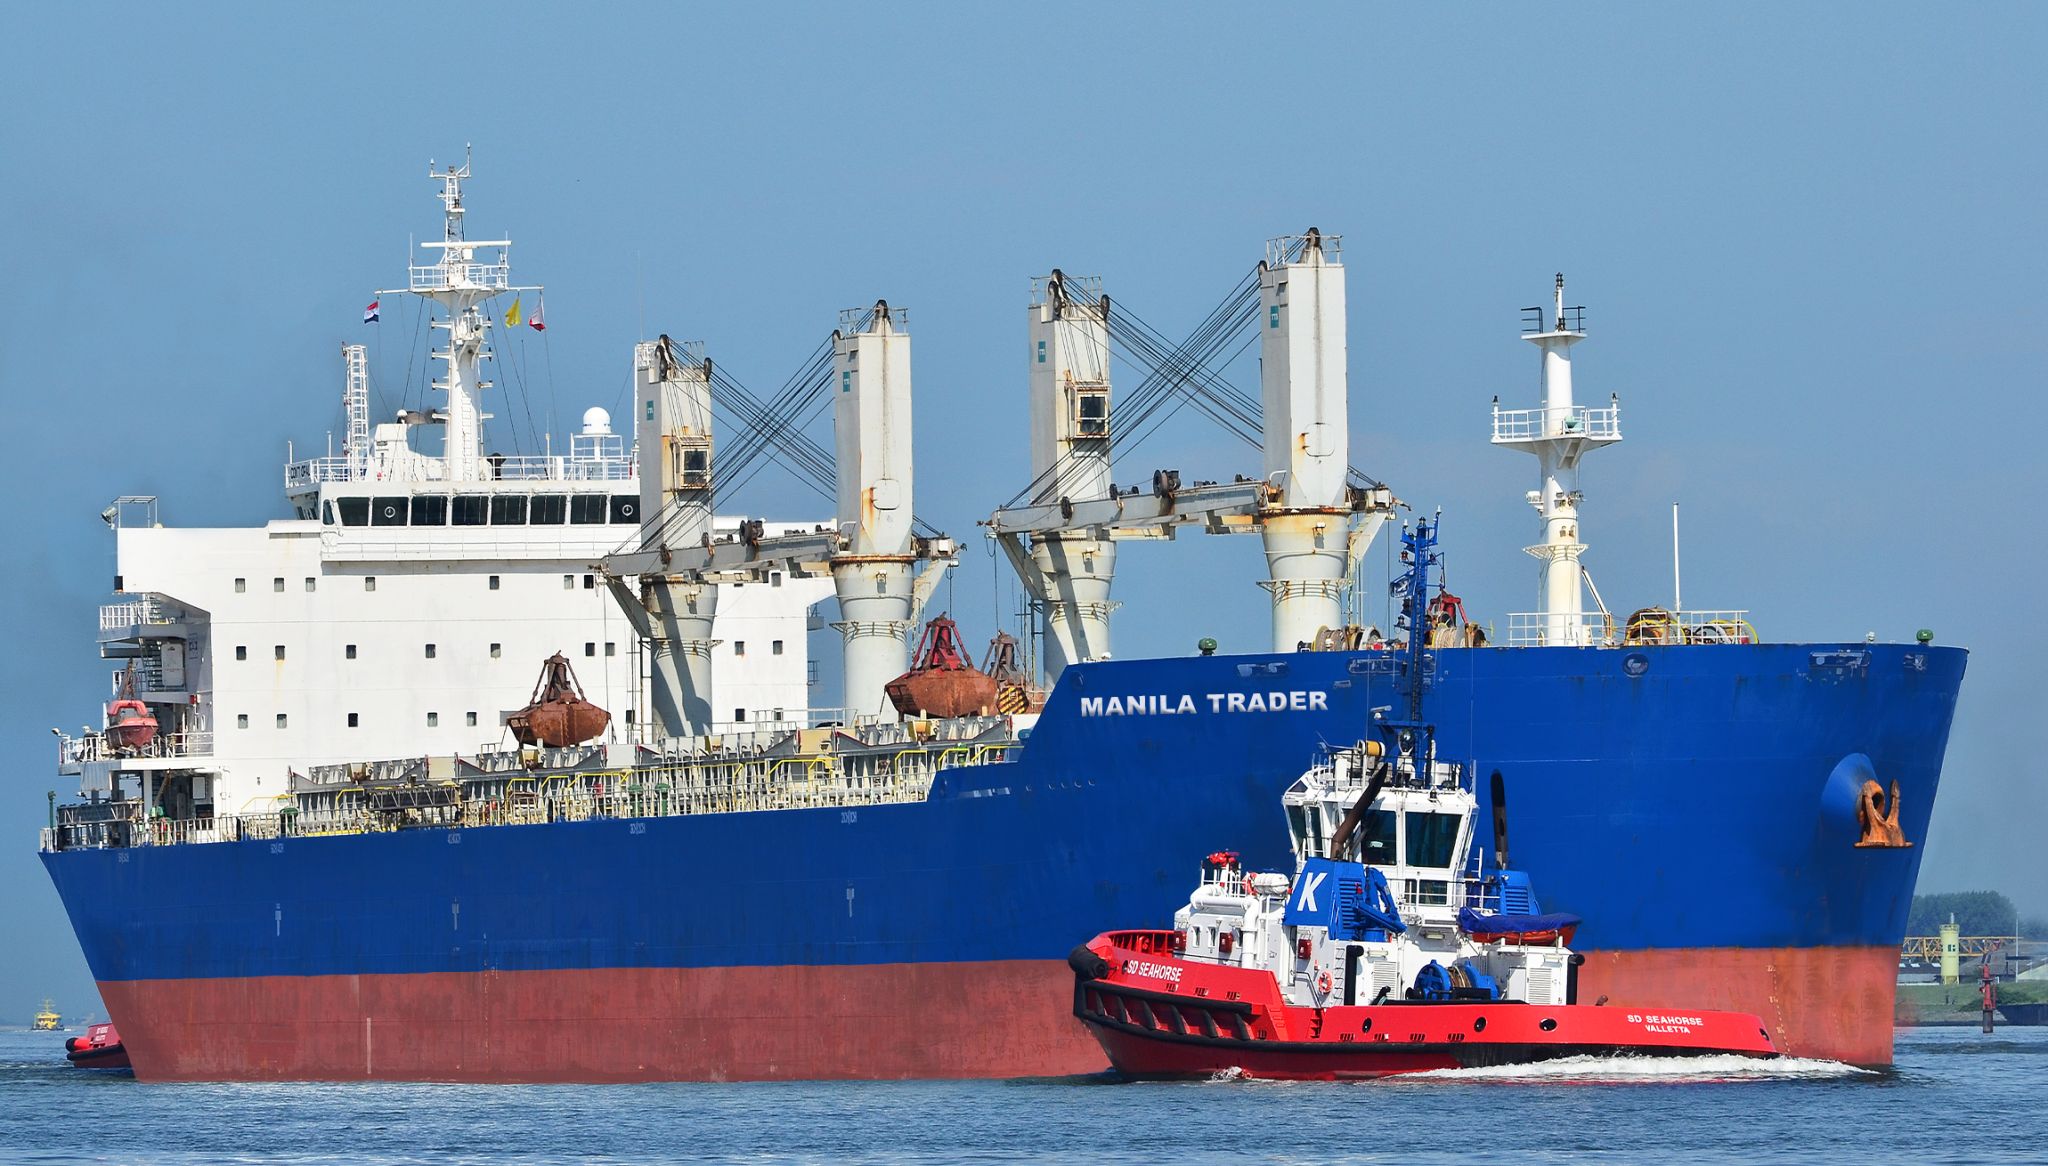 Lomar struck $24m loan for three bulkers as shifts focus away from containers